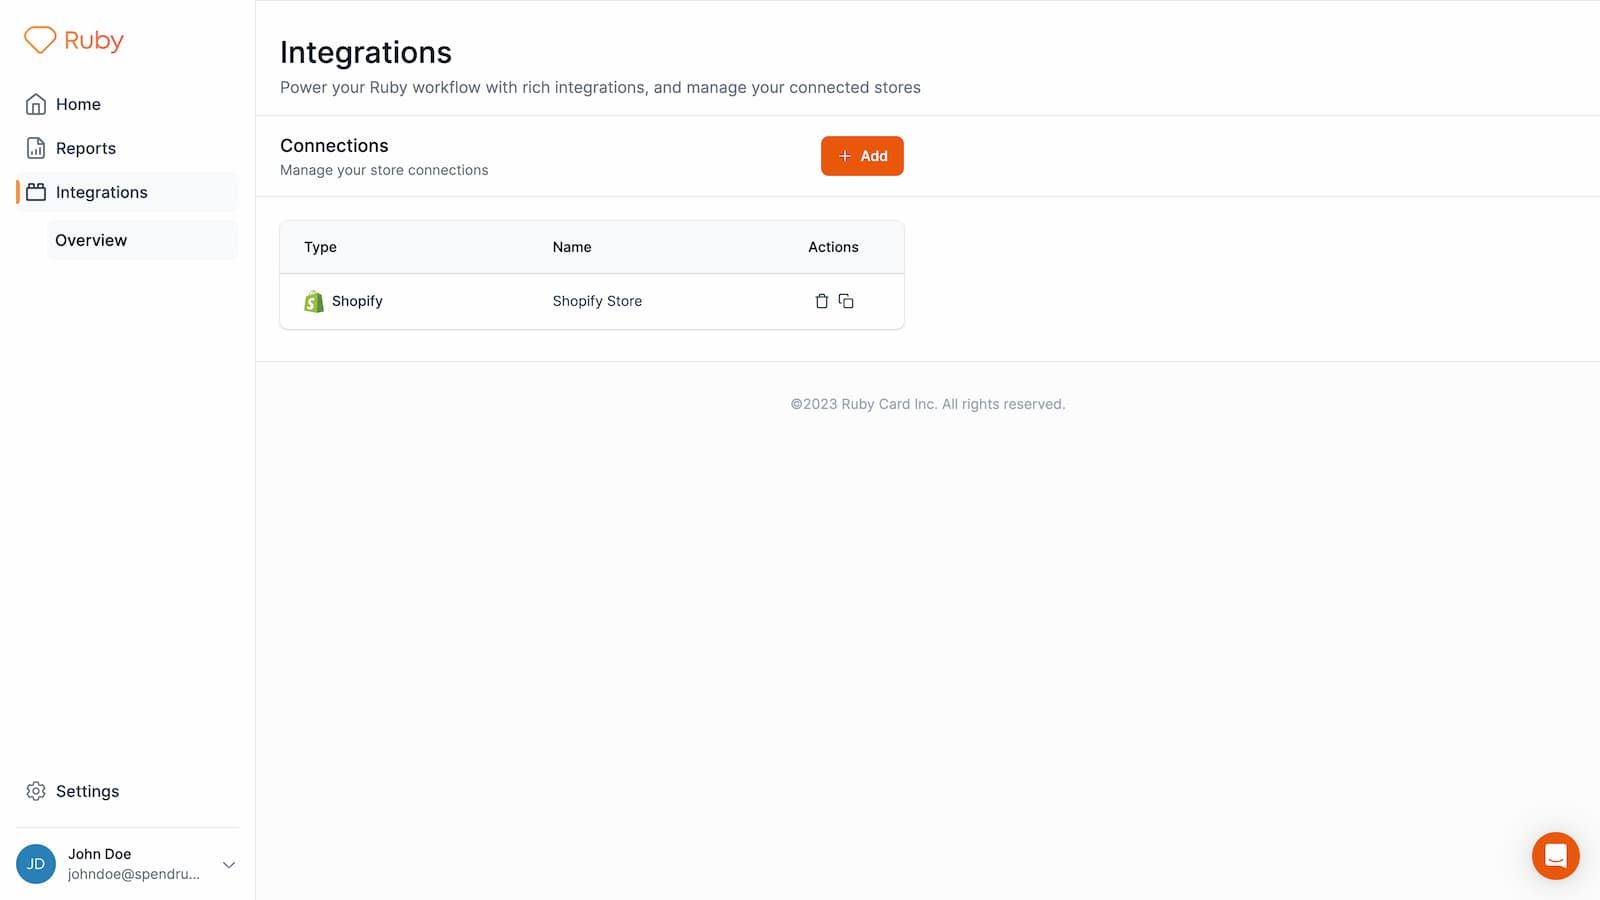 Manage all your connected stores in the integrations page